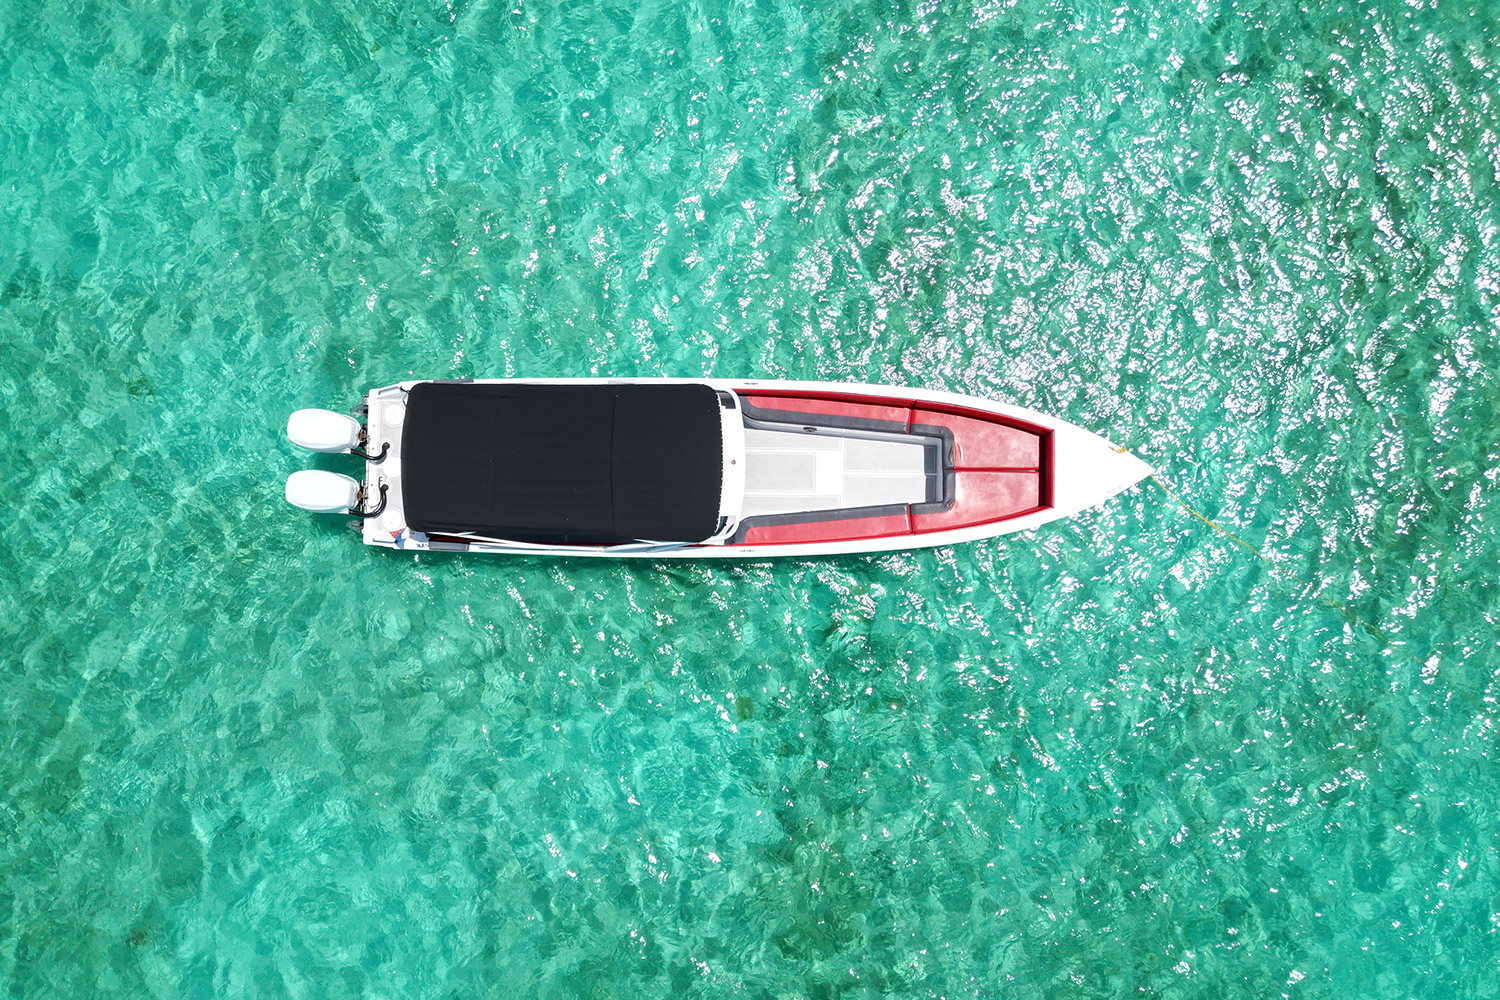 The Cigarette 36 is an elegantly designed yacht, with clean lines.